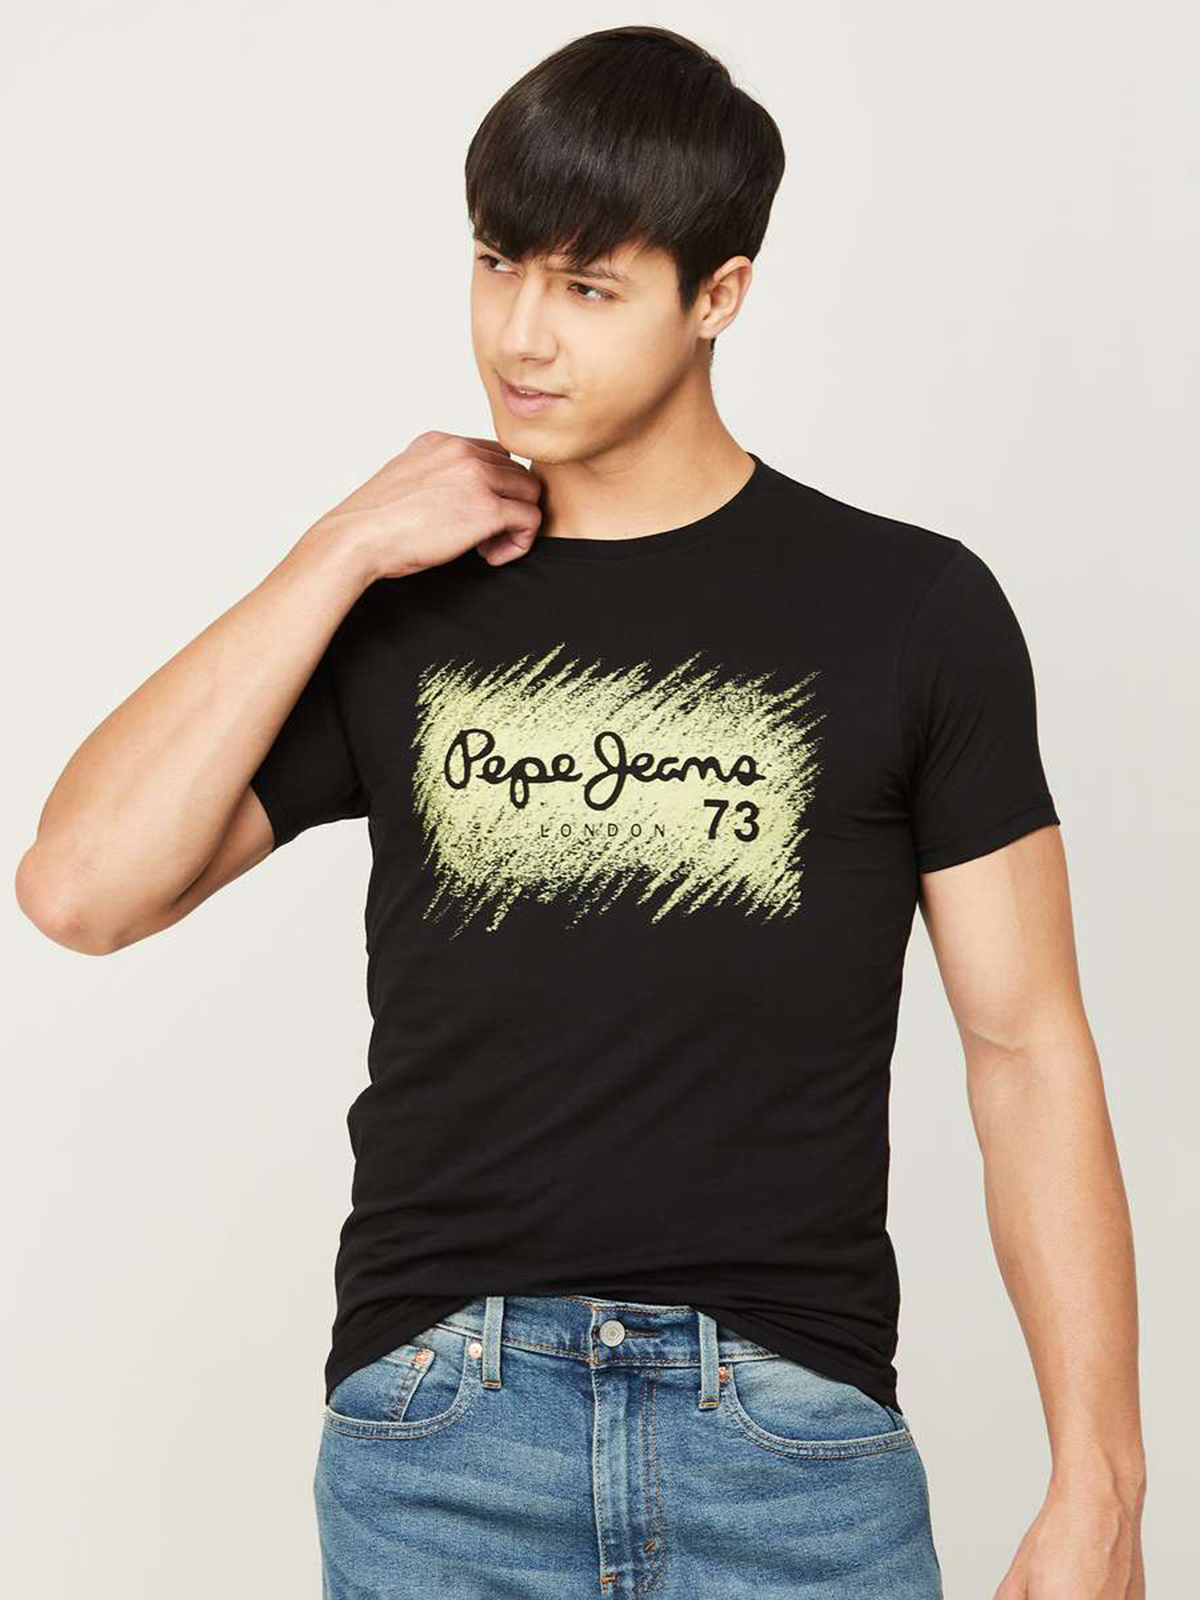 Buy Full Sleeve T-shirts at Best Price – Peplos Jeans